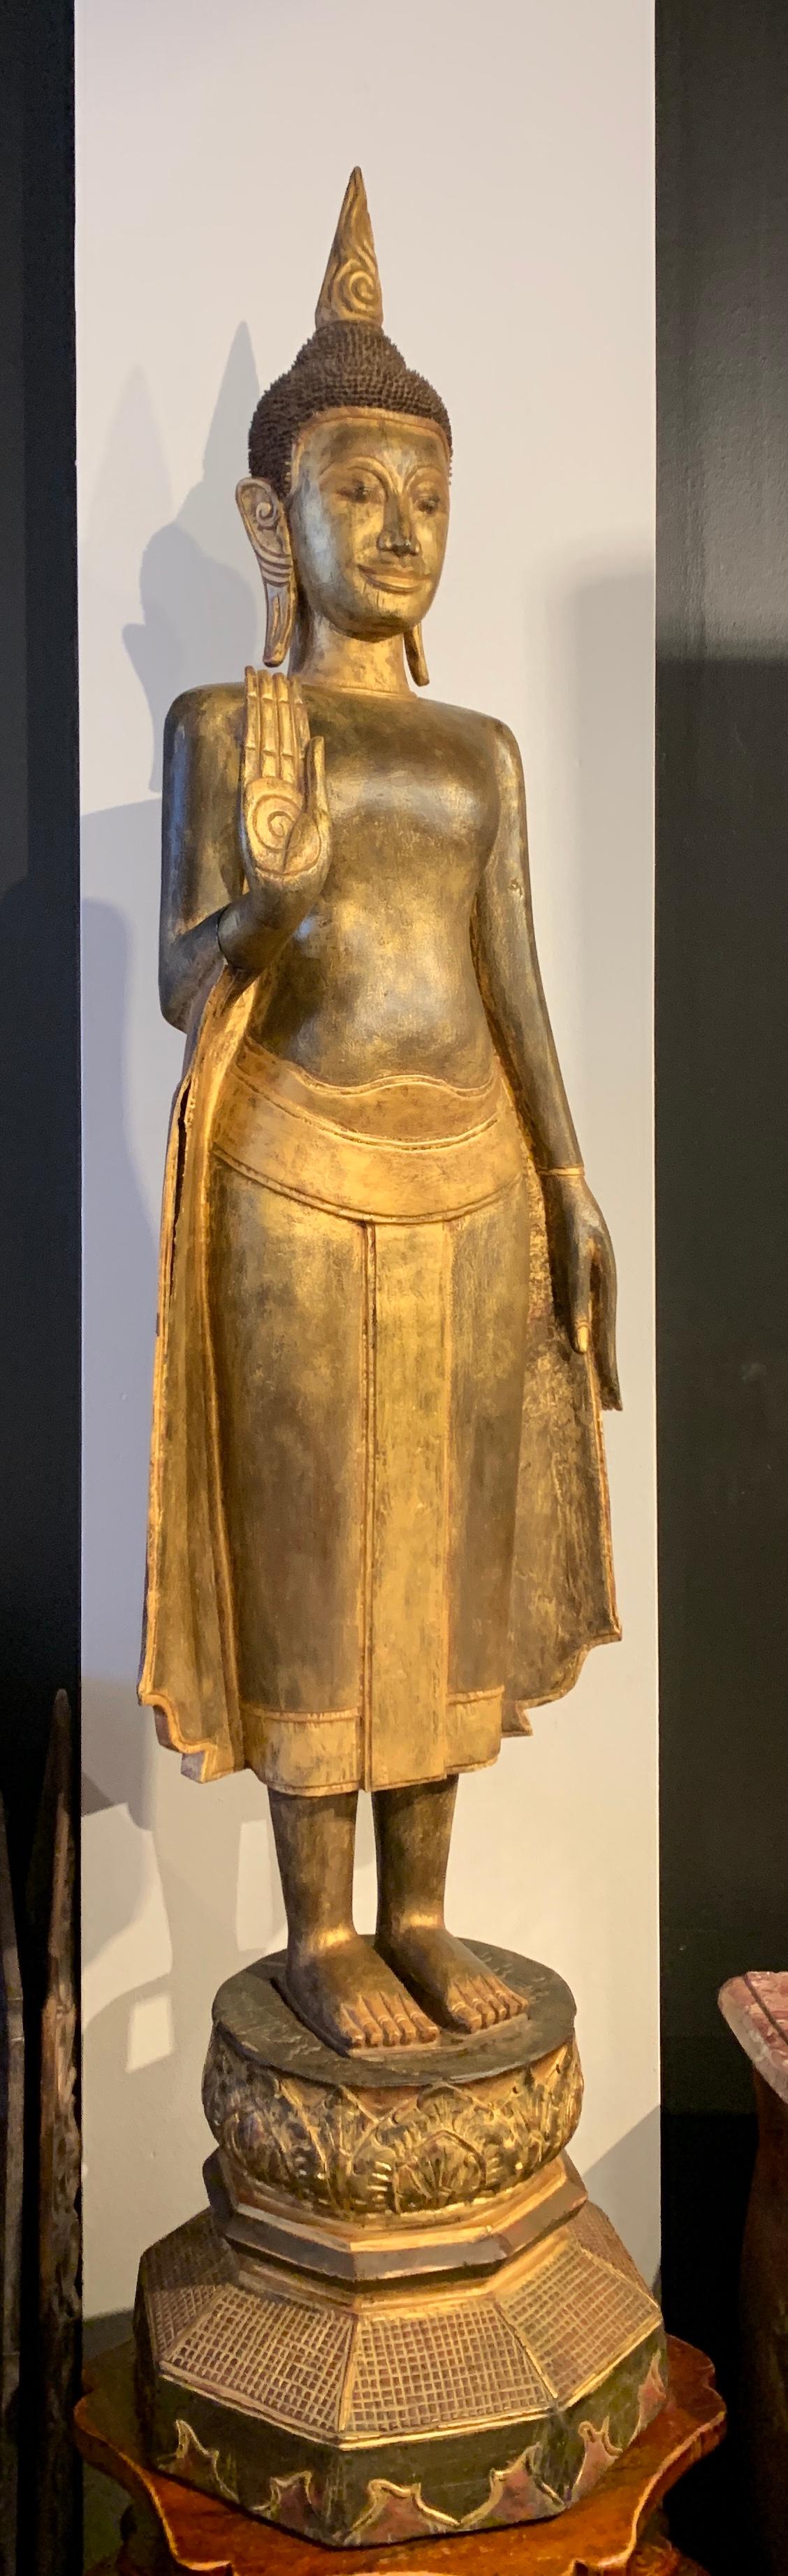 A large, tall Thai standing carved teak wood Buddha, lacquered and gilt, with hand raised in abhaya mudra, far Northern Thailand or possibly Laos, early 20th century. 

Near life-sized and carved from solid teak, the Buddha is portrayed standing